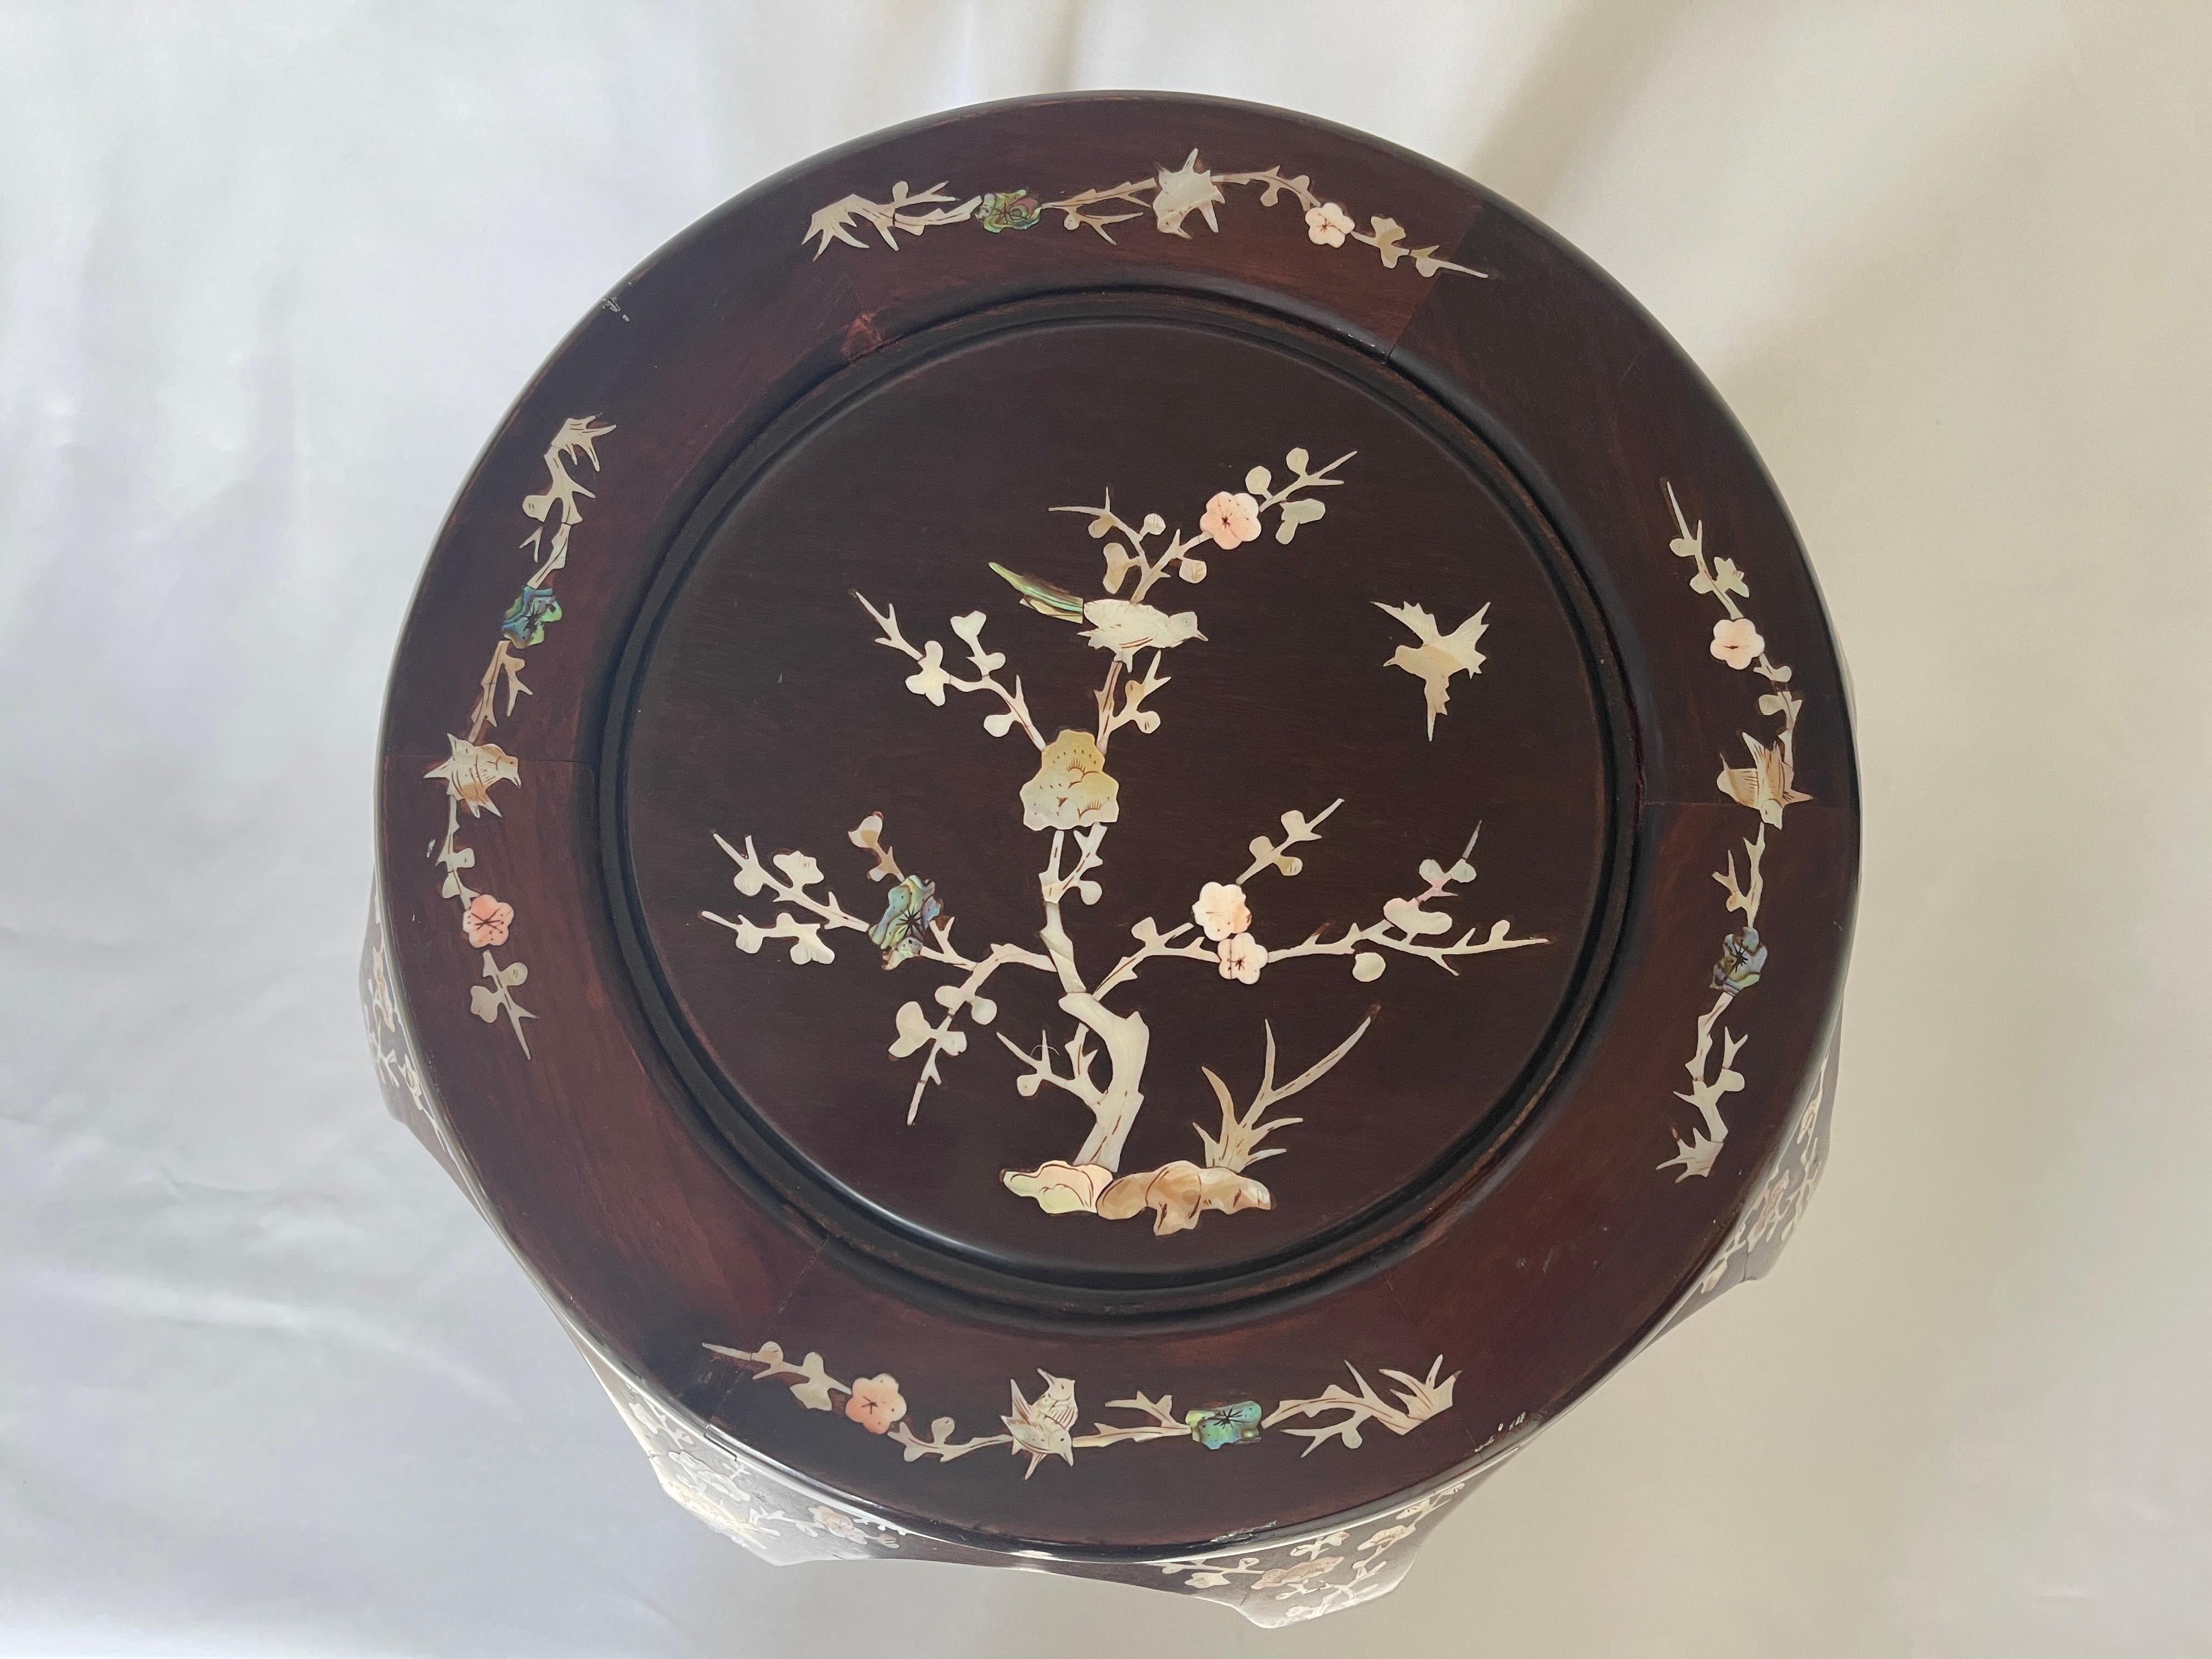 Chinese curved melon shape hardwood garden stool or side table with mother of pearl inlay.
Beautiful floral tree and bird motif inlaid top, with floral sprays at top of curved wood base.